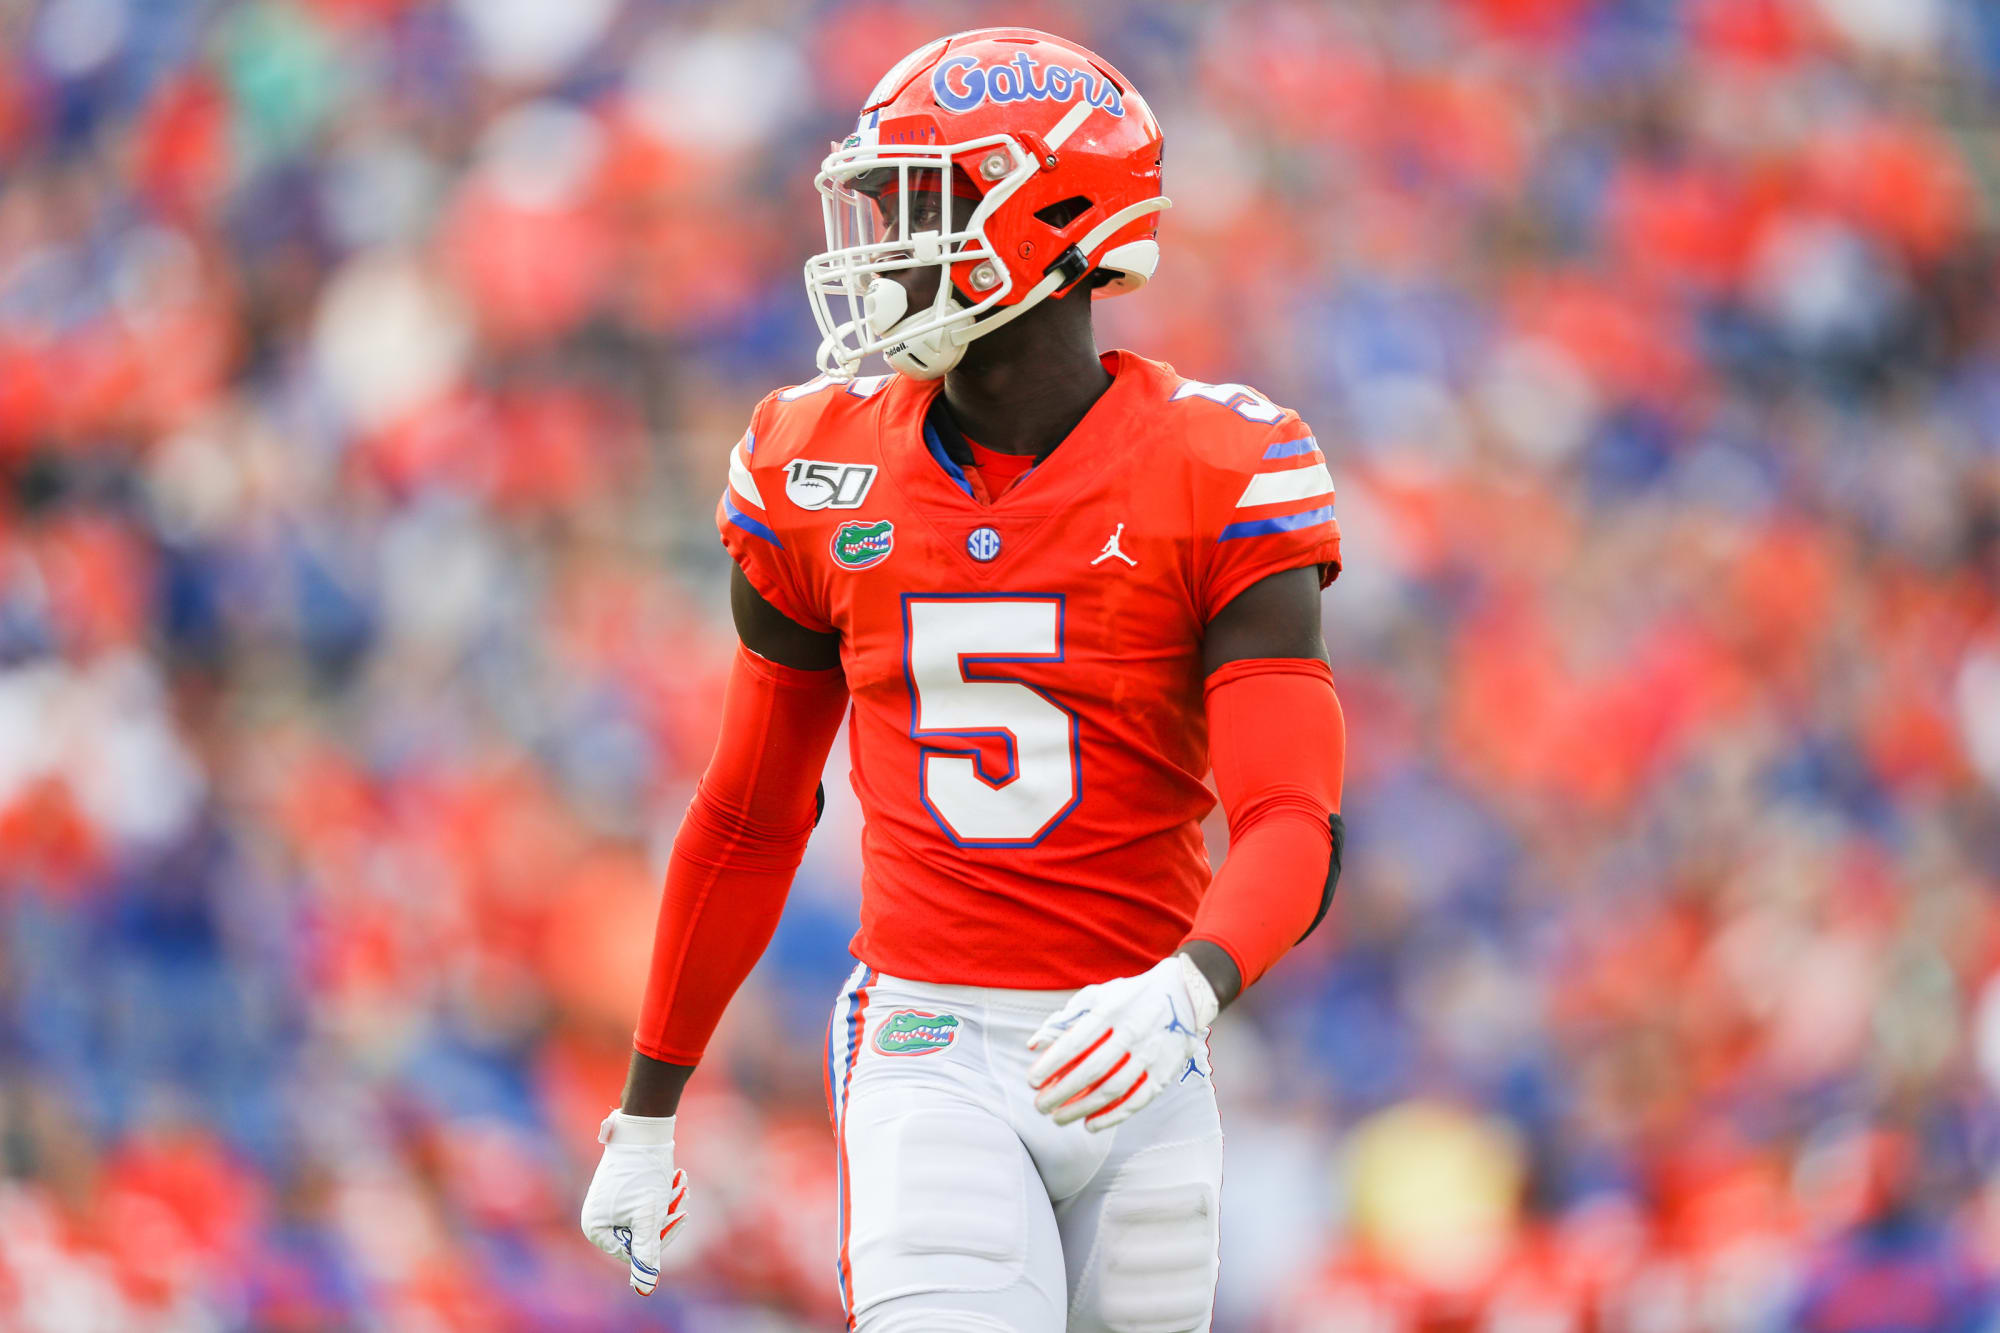 Florida football 5 Gators that could be drafted early in the 2022 NFL